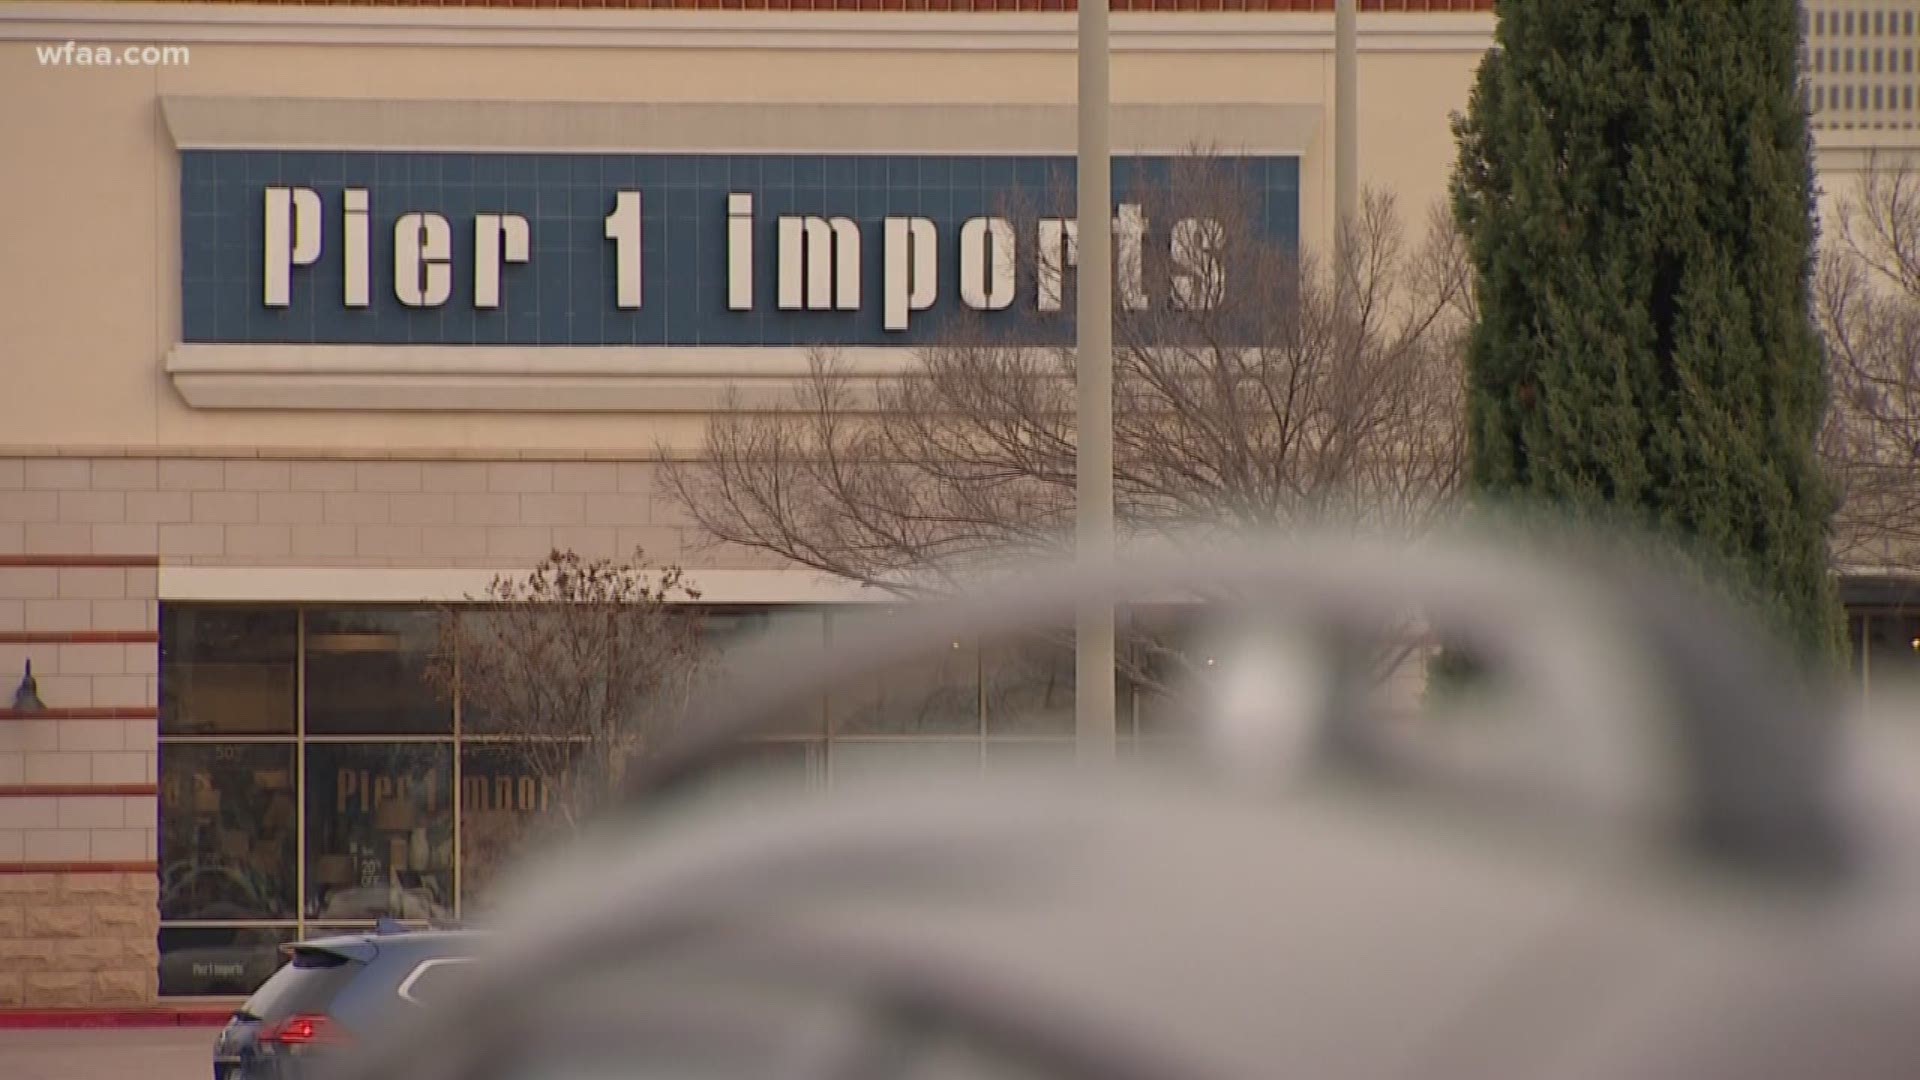 Pier 1 Imports said it's in talks with multiple potential buyers that could acquire the retailer.